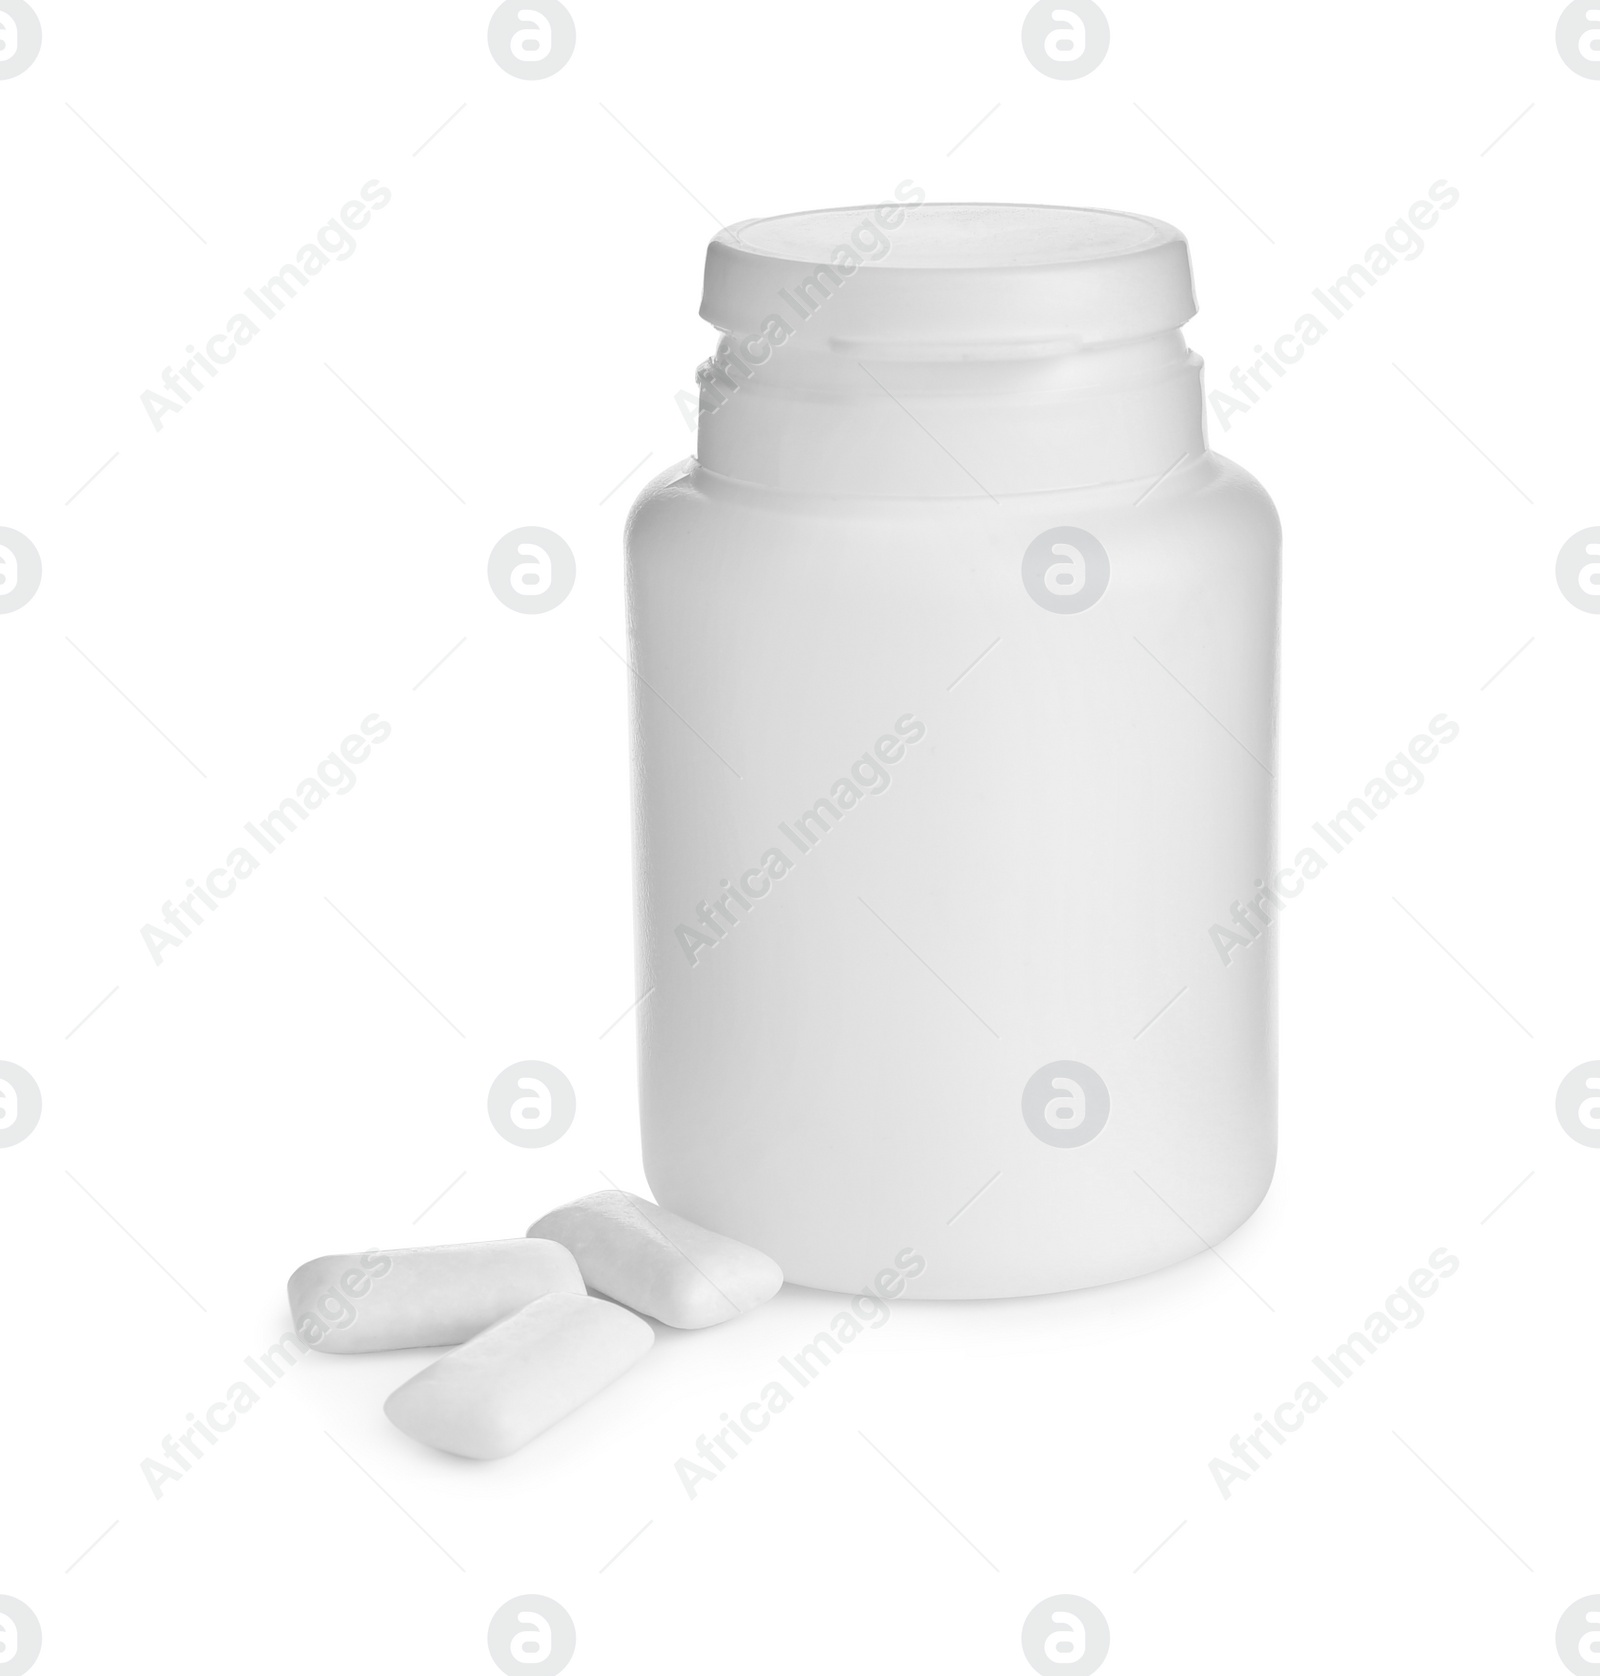 Photo of Chewing gum pieces and jar on white background